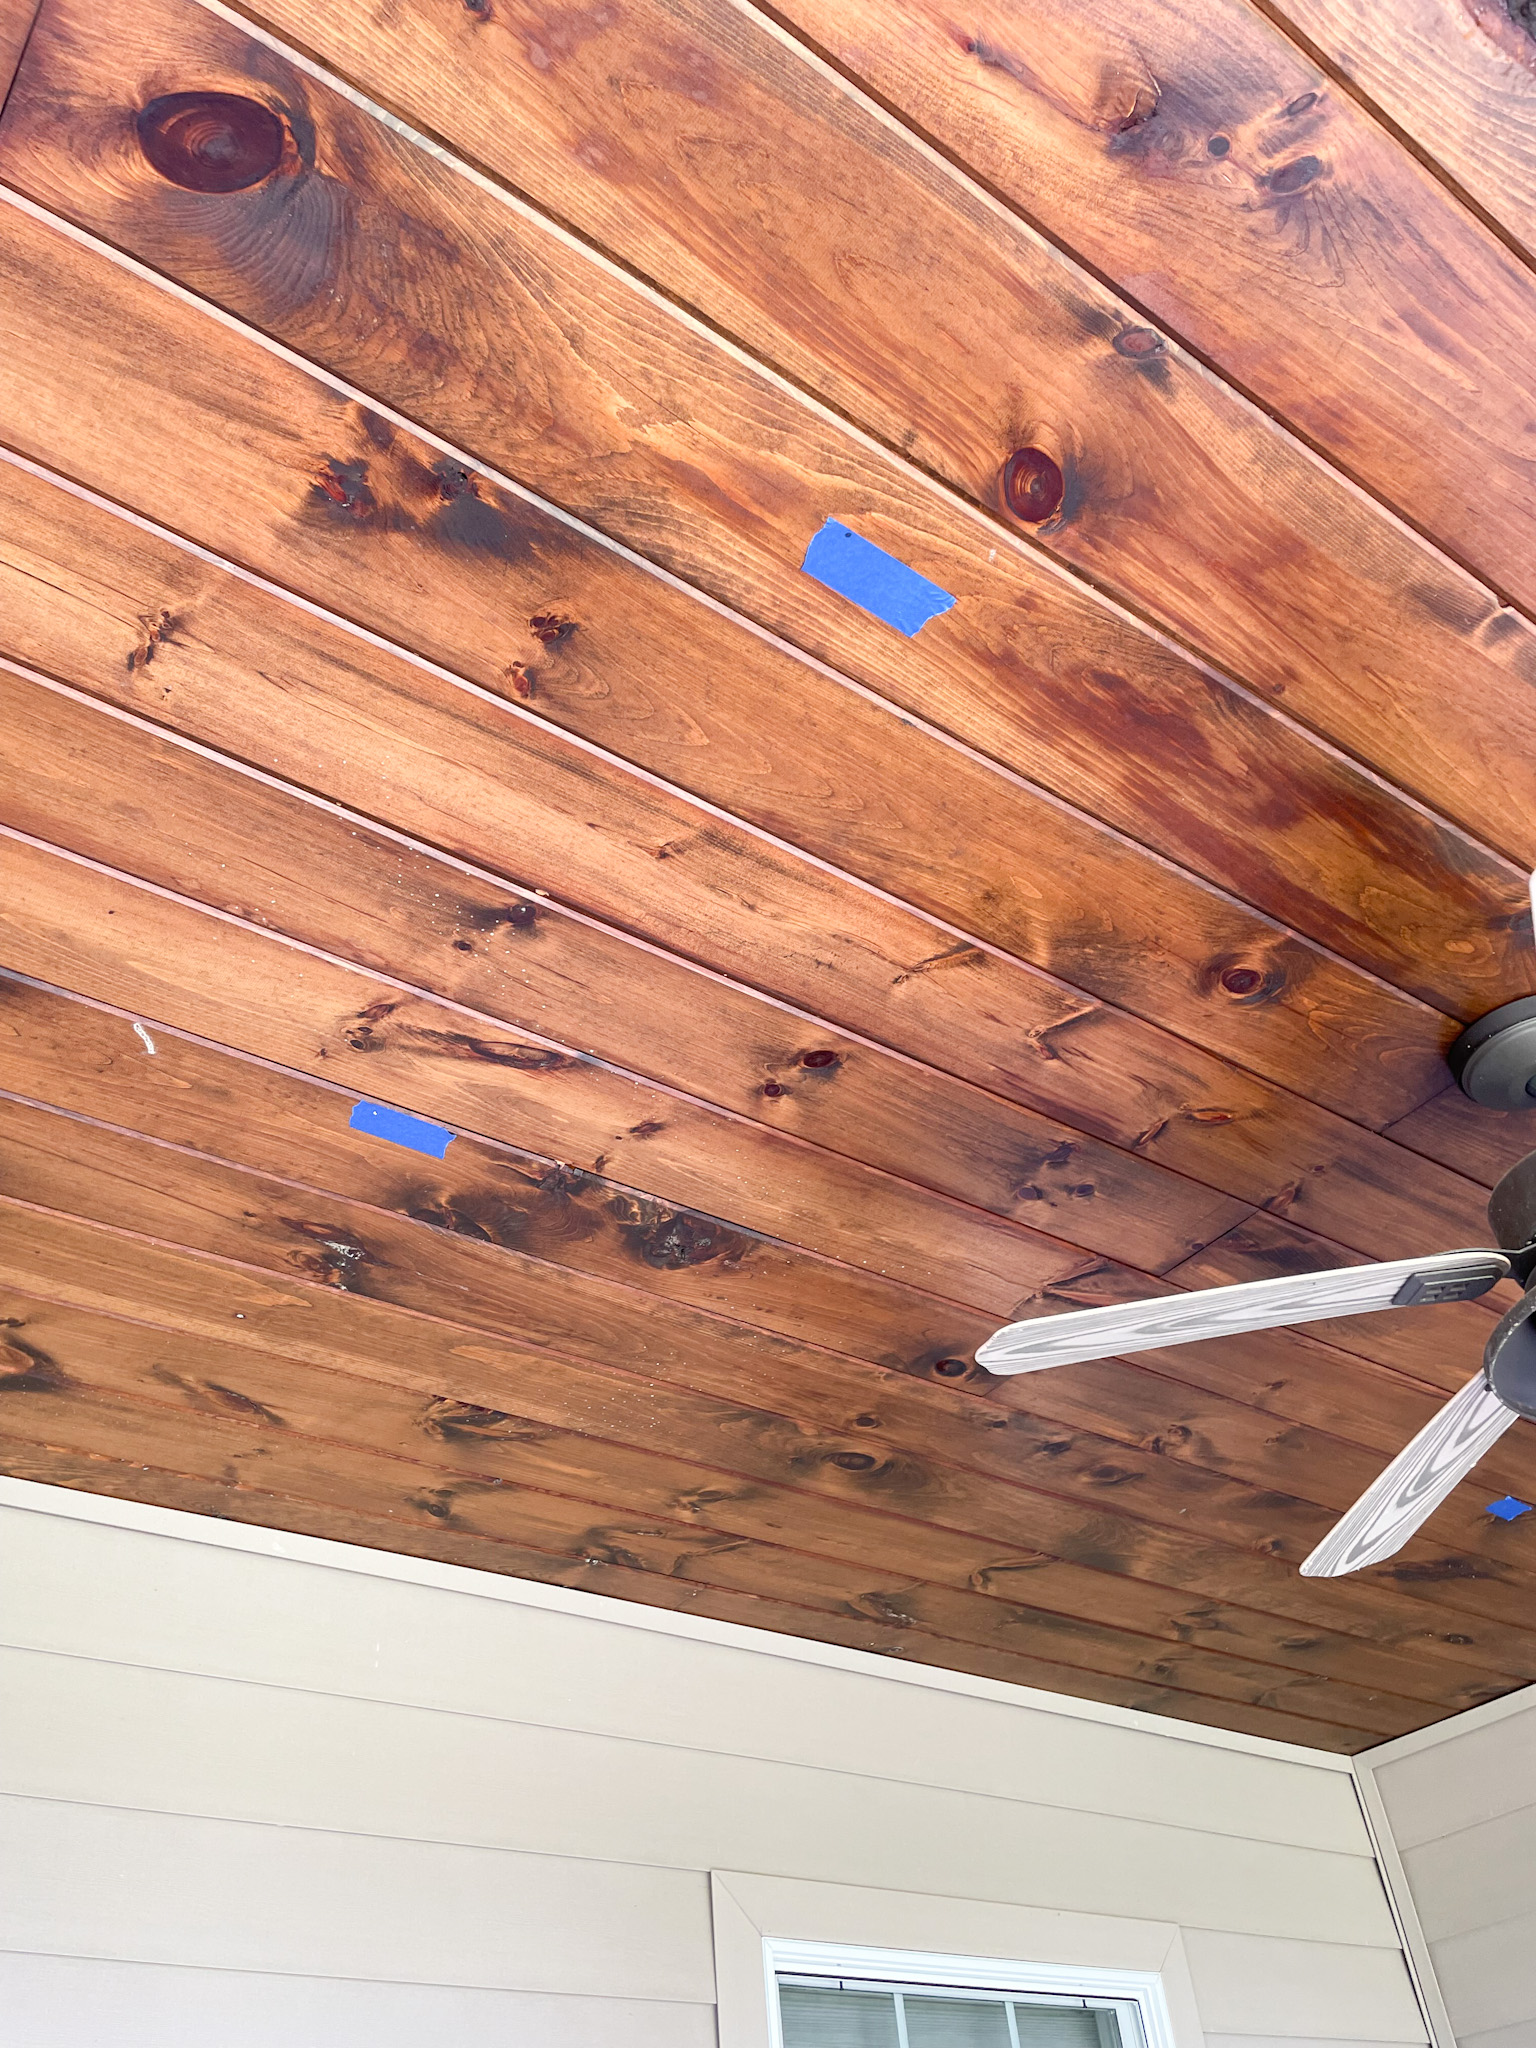 wood ceiling marked with blue tape